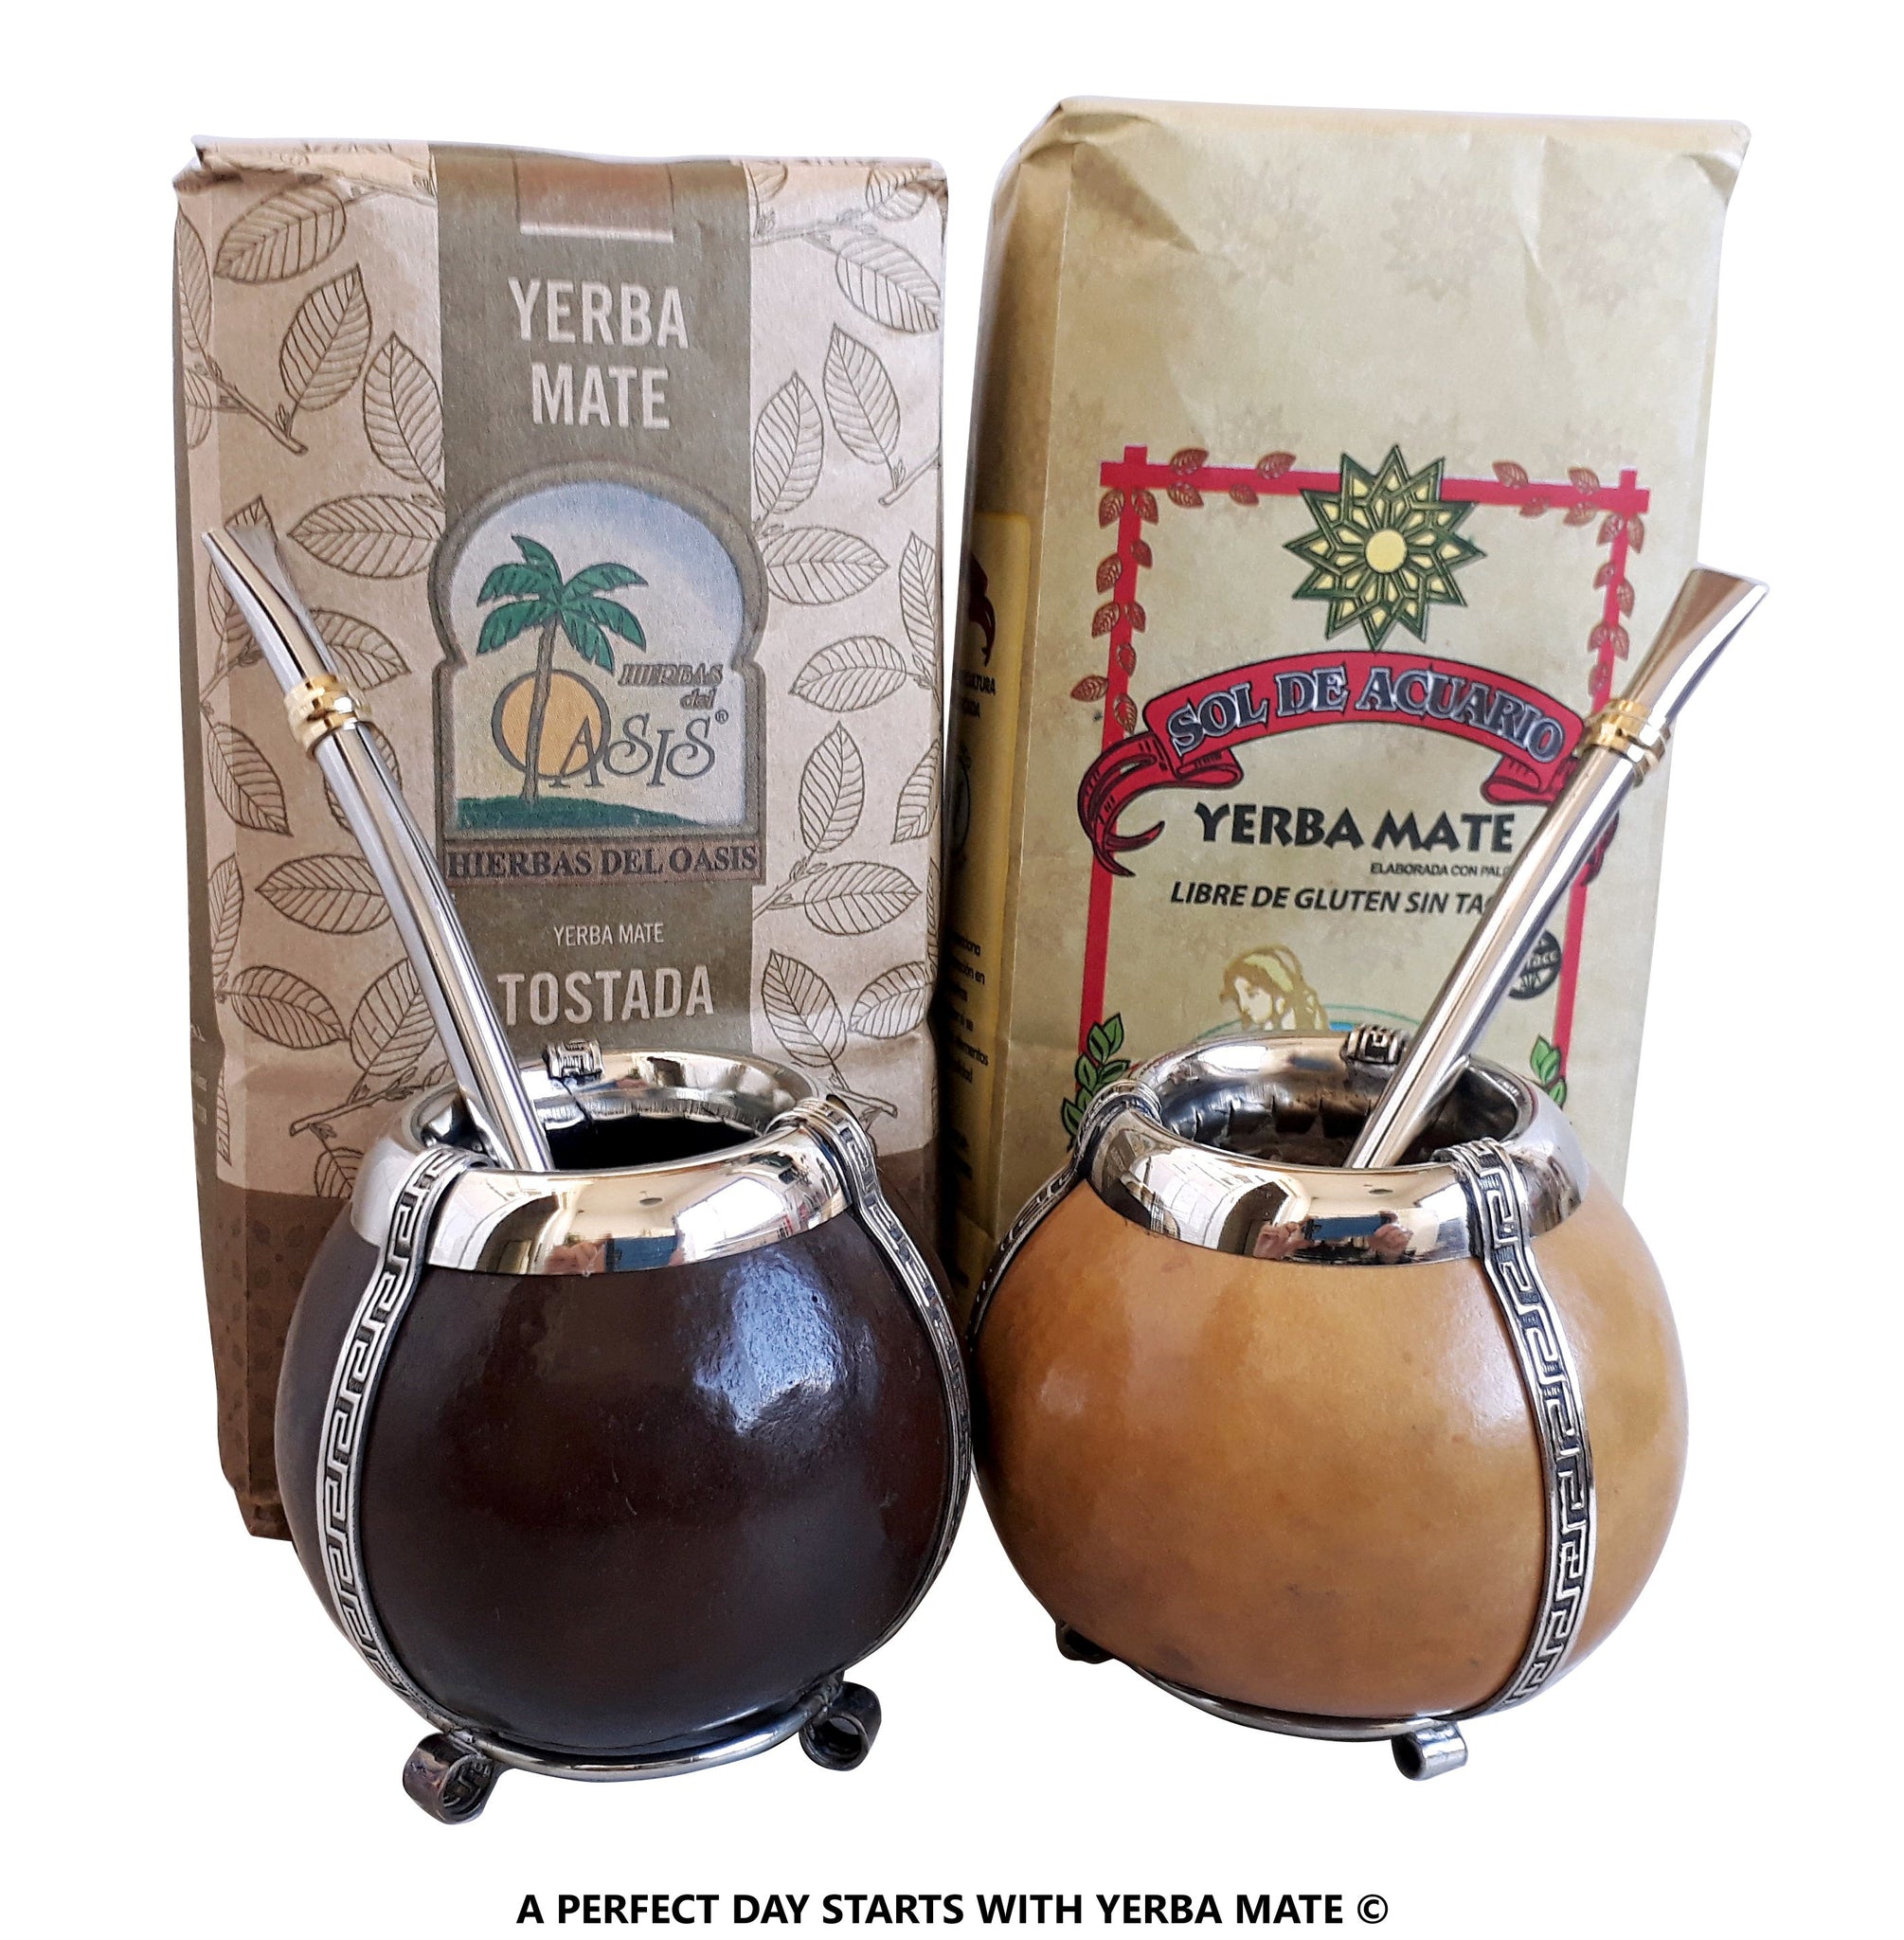 Complete Yerba Mate Kit for Starters - Stainless-Steel Mate Cup 2 Bombillas